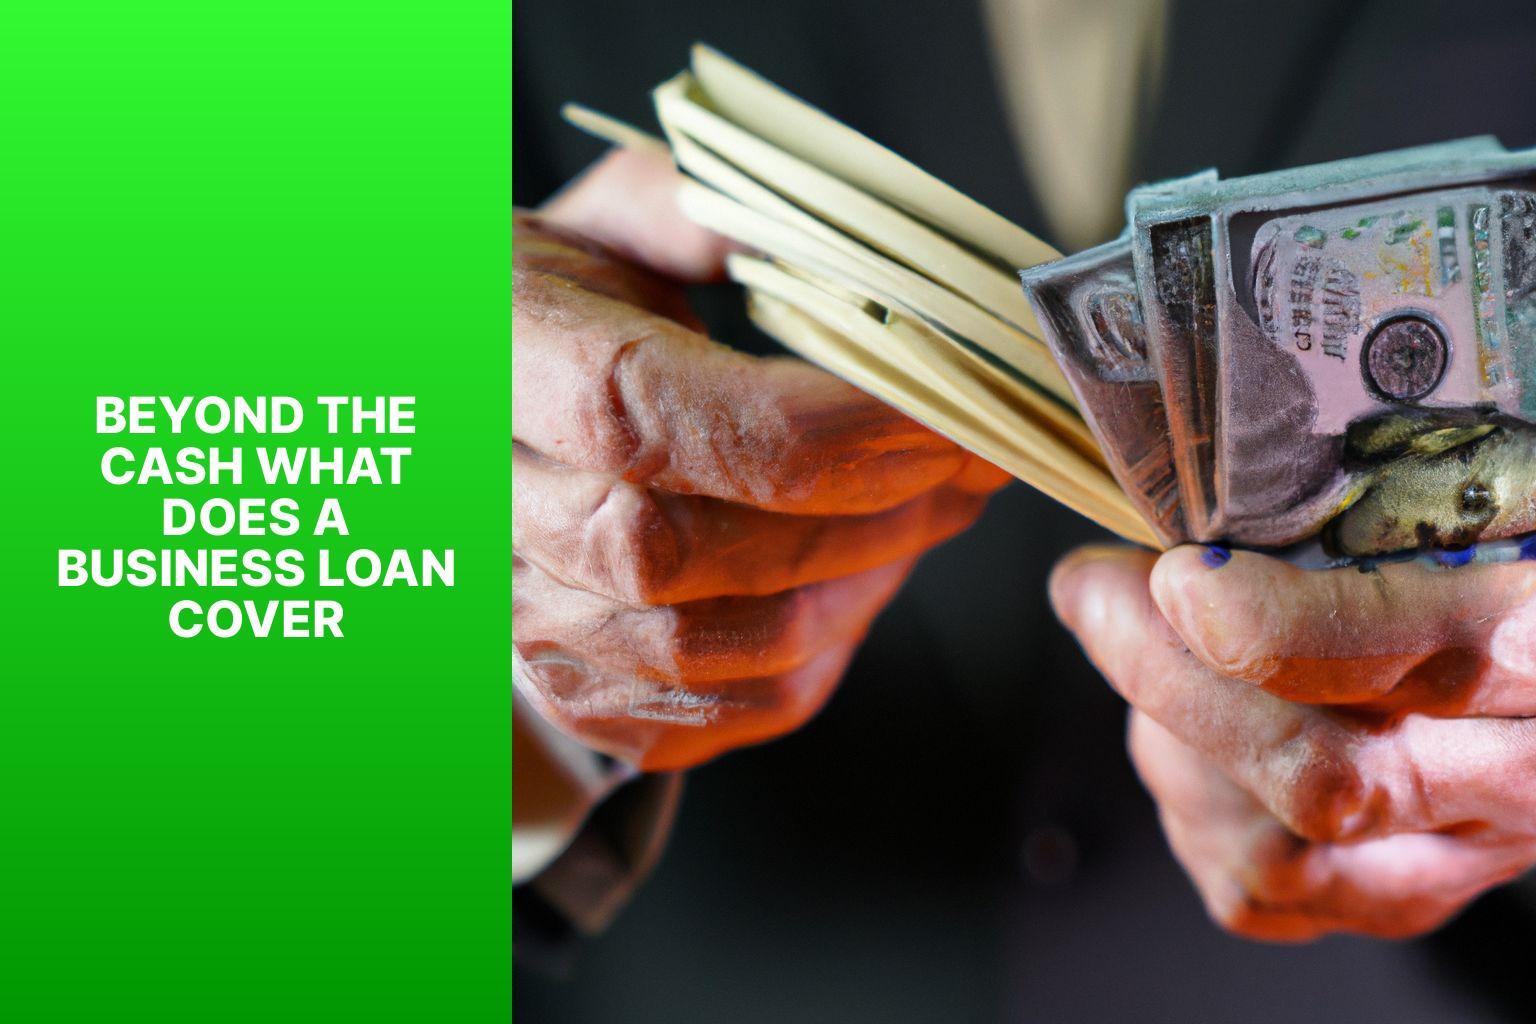 Beyond the Cash What Does a Business Loan Cover